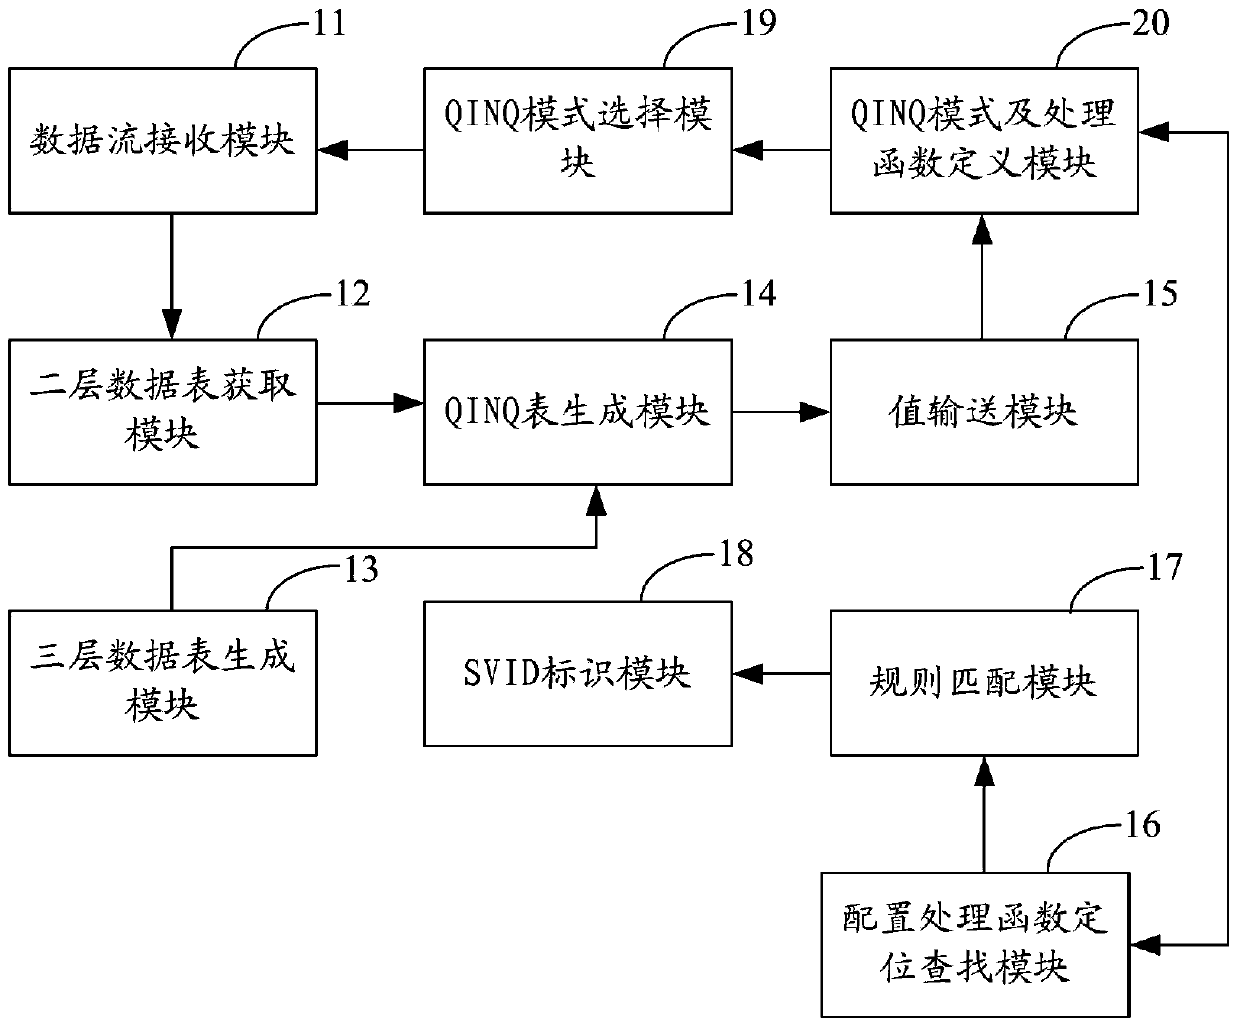 Method and system for processing passive optical network (PON) optical line terminal (OLT) equipment QINQ messages